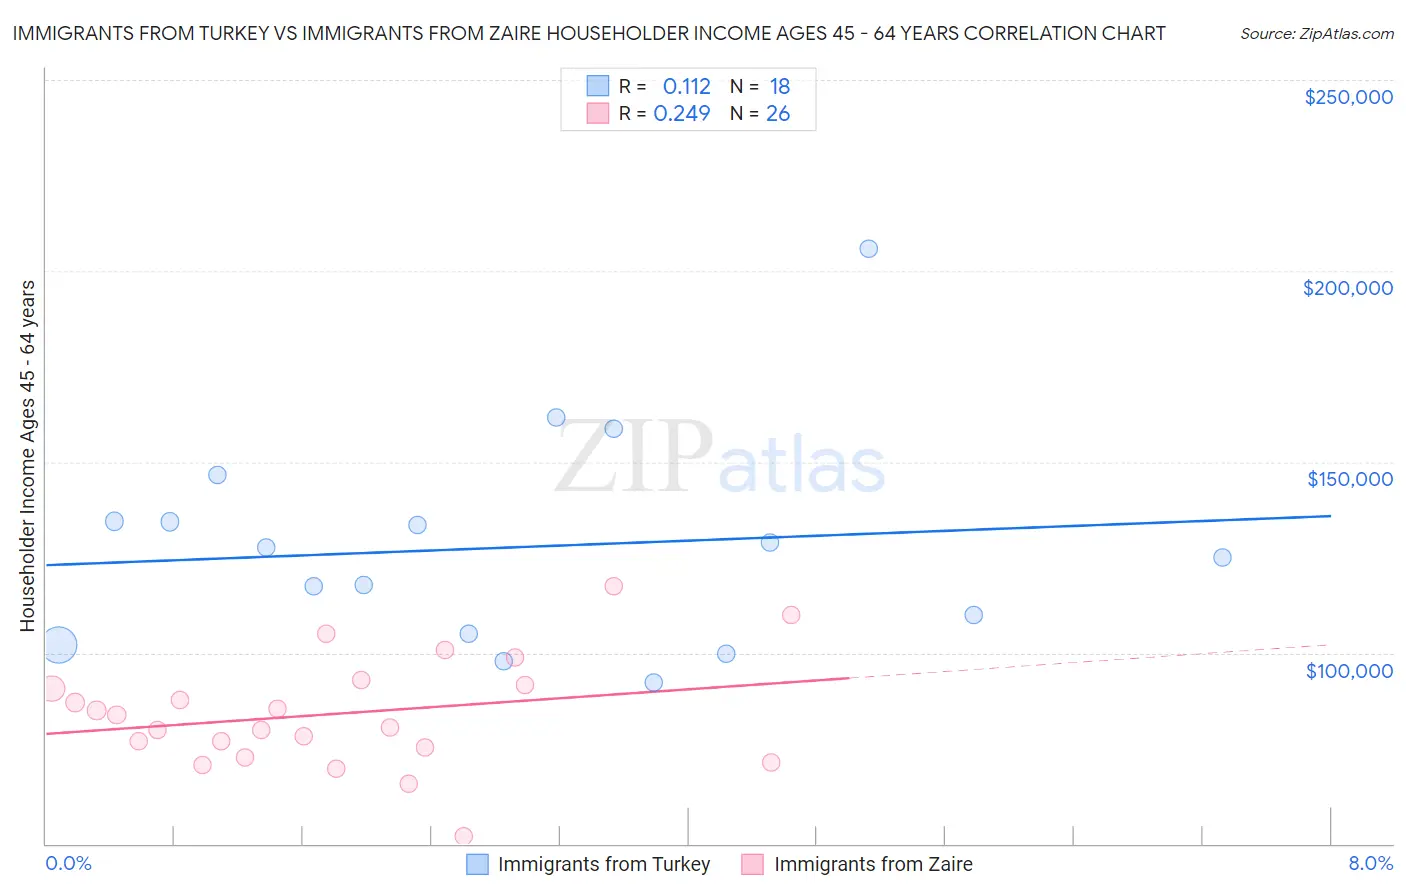 Immigrants from Turkey vs Immigrants from Zaire Householder Income Ages 45 - 64 years